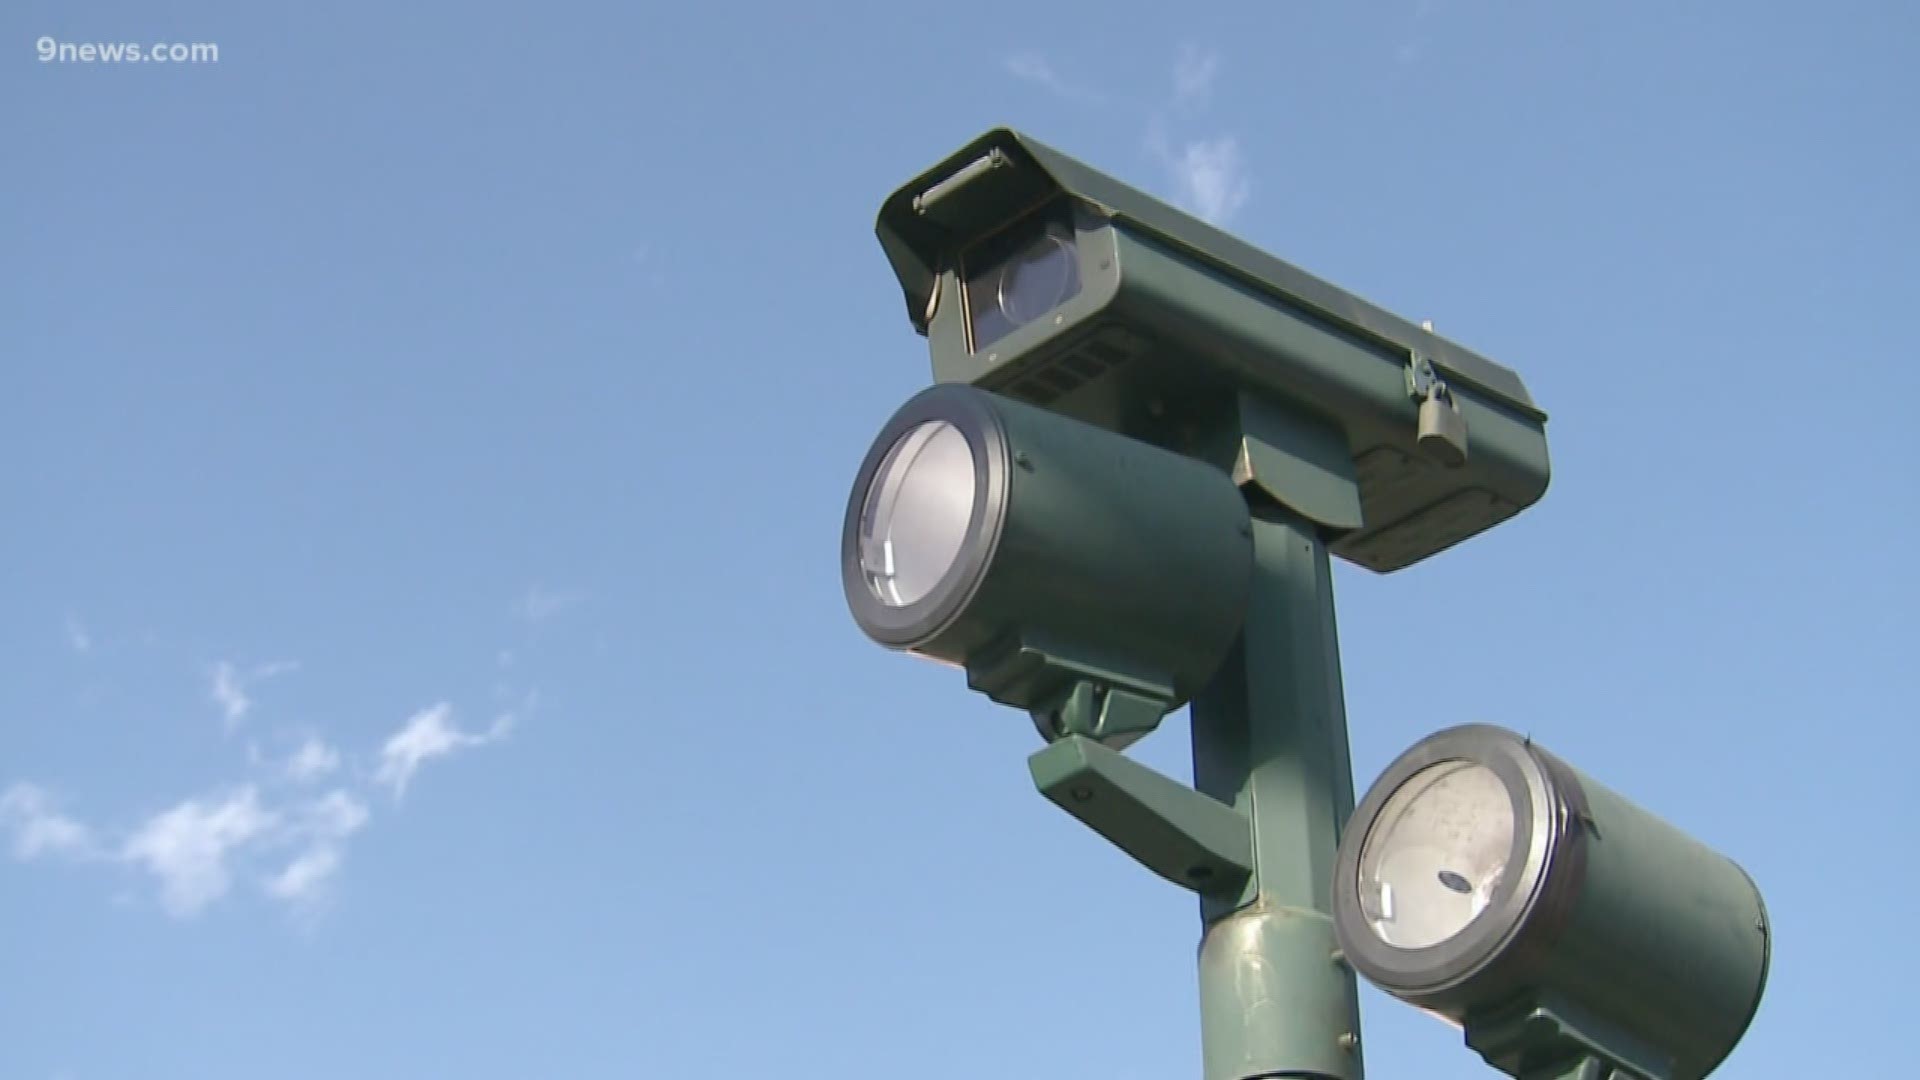 State regulators have sent a cease and desist letter to the company that installed Denver’s red light cameras, claiming the company didn’t have the proper state licensing to engineer the project.